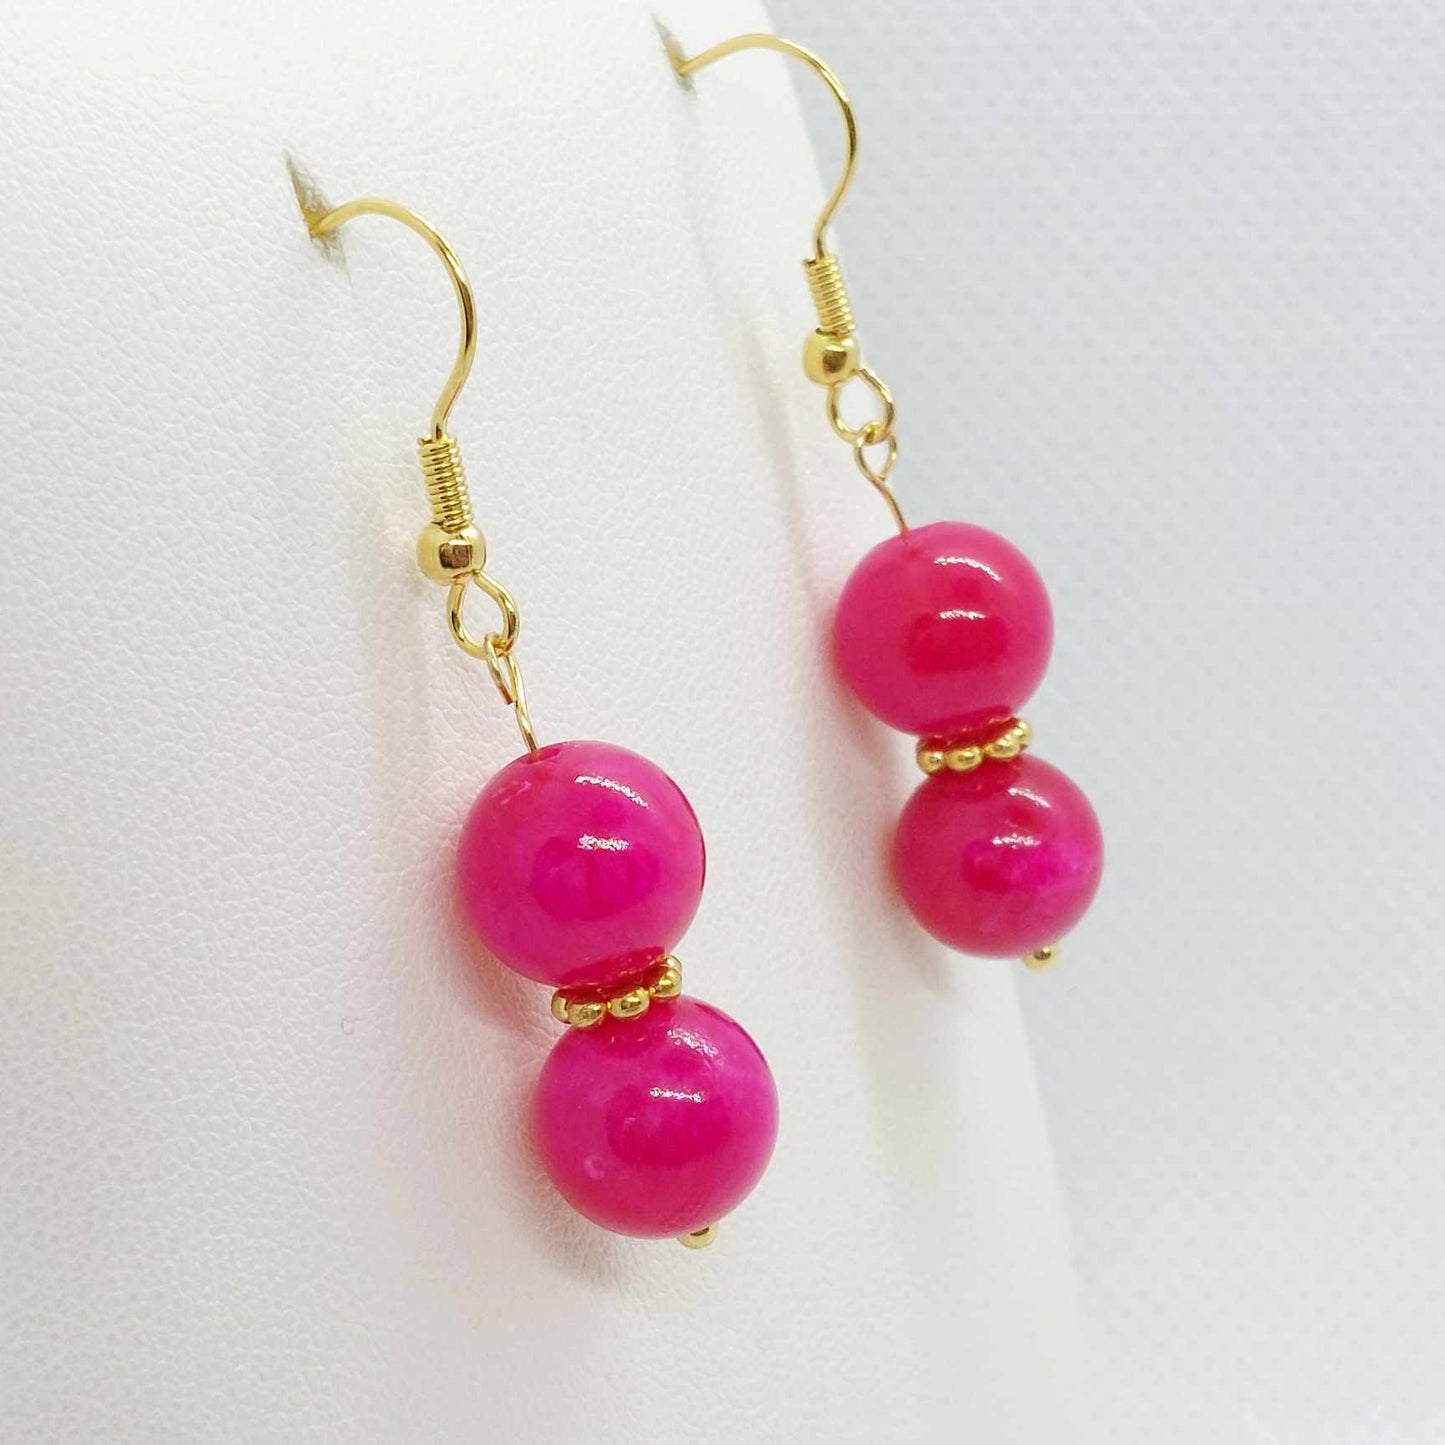 Natural Pink Chalcedony Dangle Earrings with 10mm Stones in Stainless Steel Gold Plated